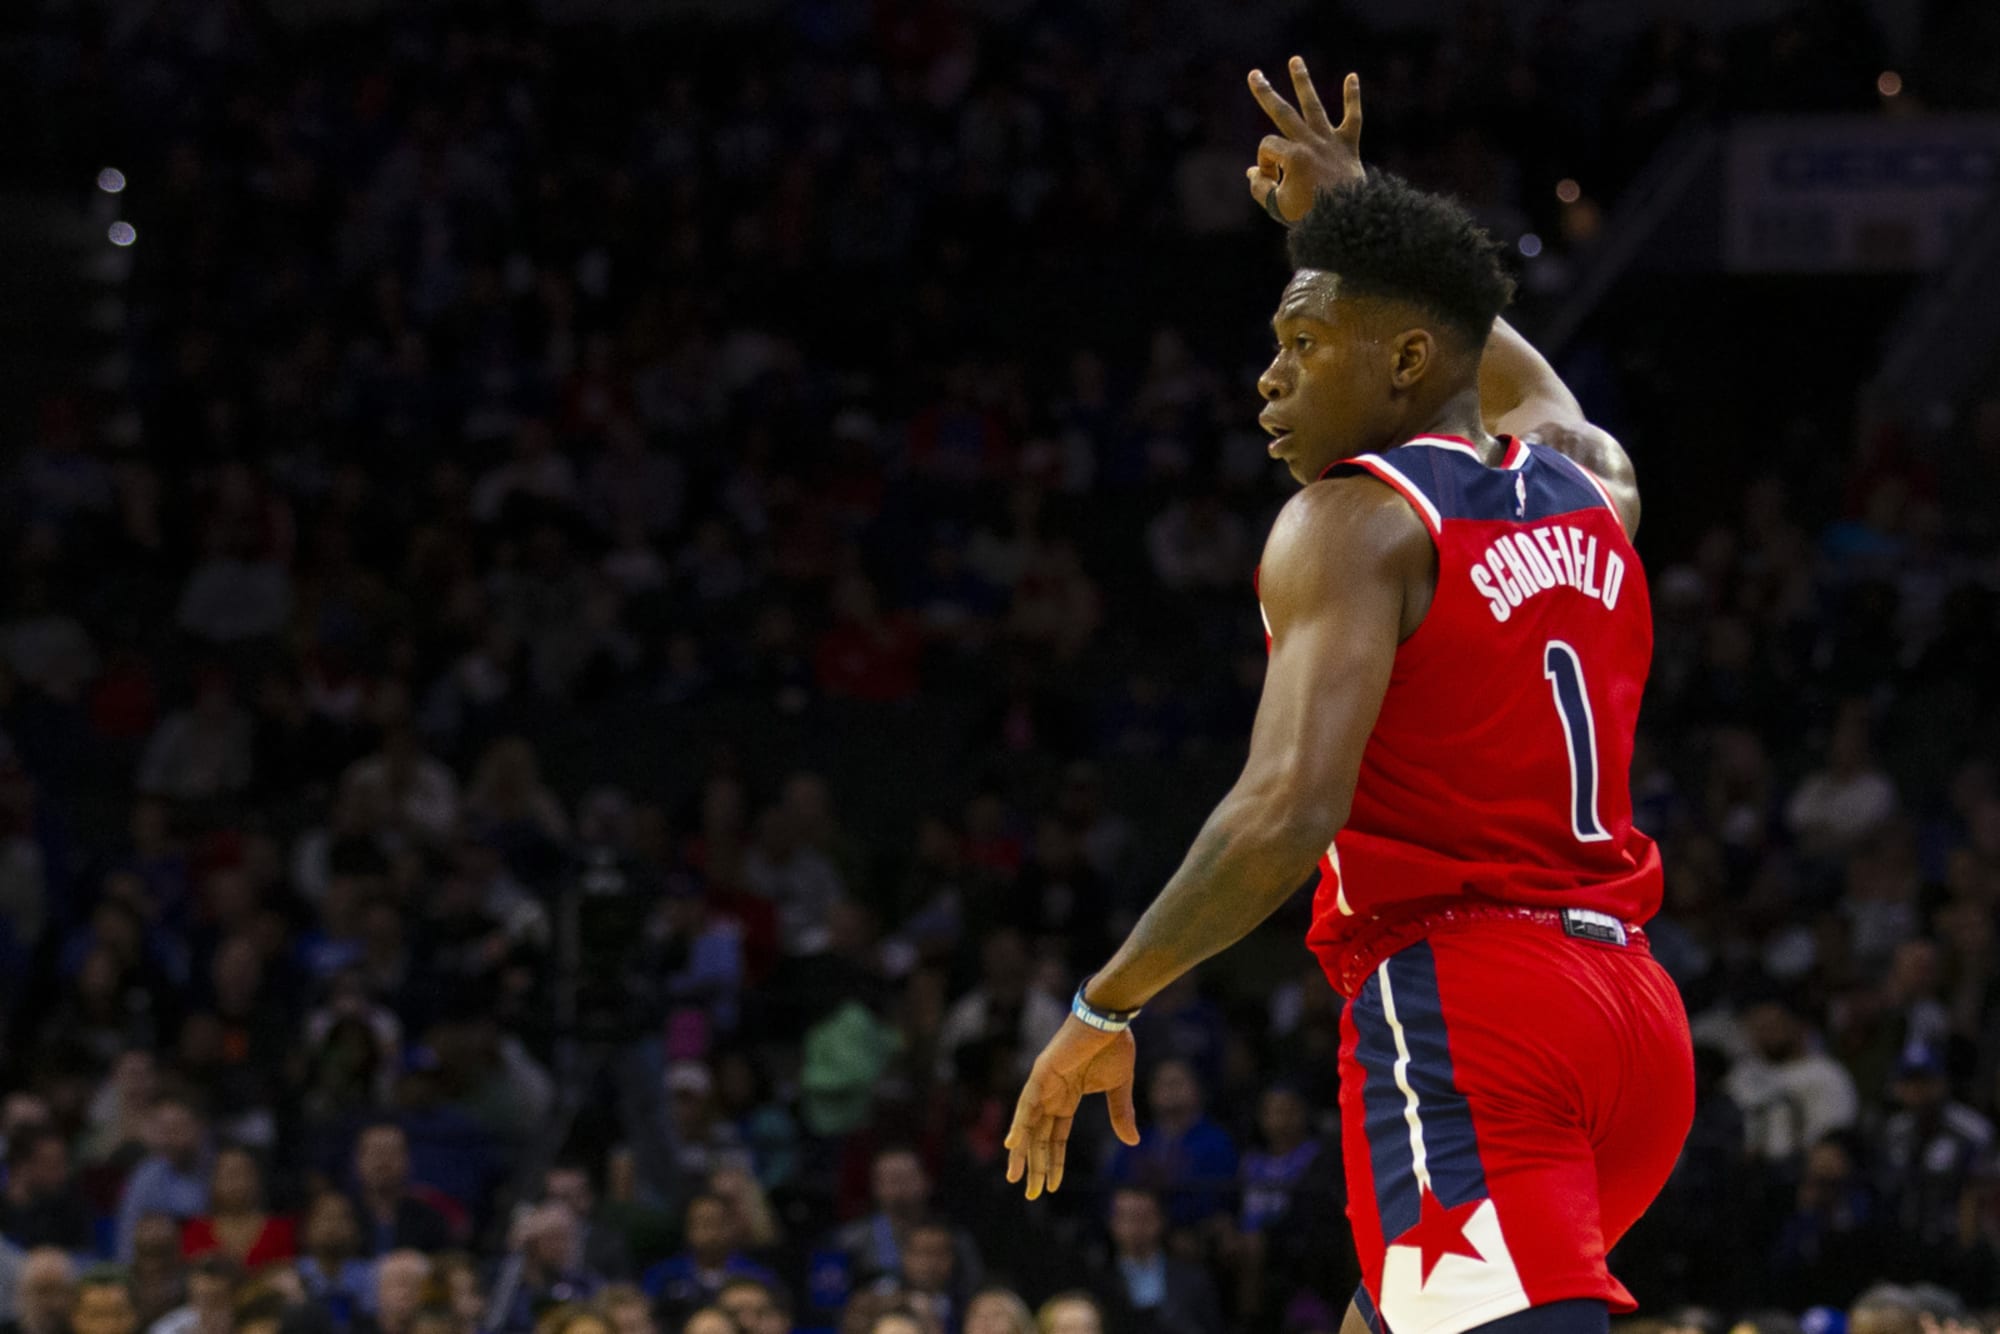 Washington Wizards: It's time to give Admiral Schofield more opportunity